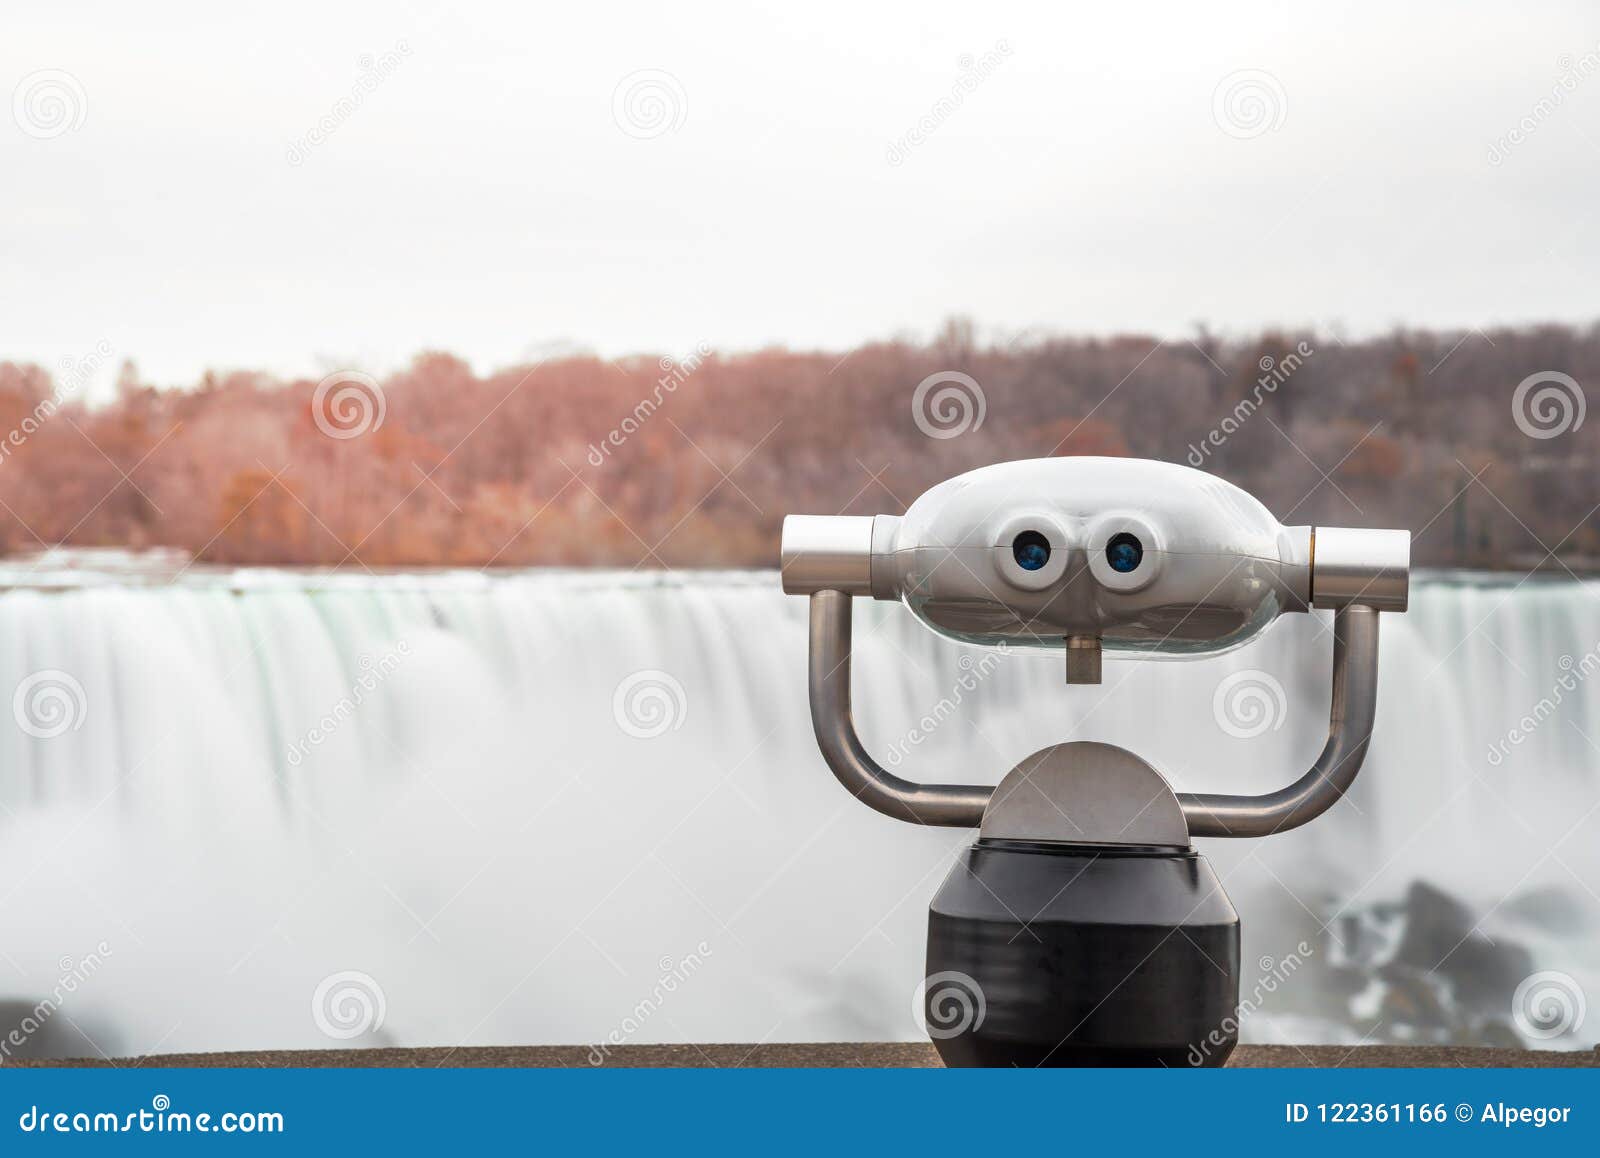 tourist binocular with a waterfall in background at sunset